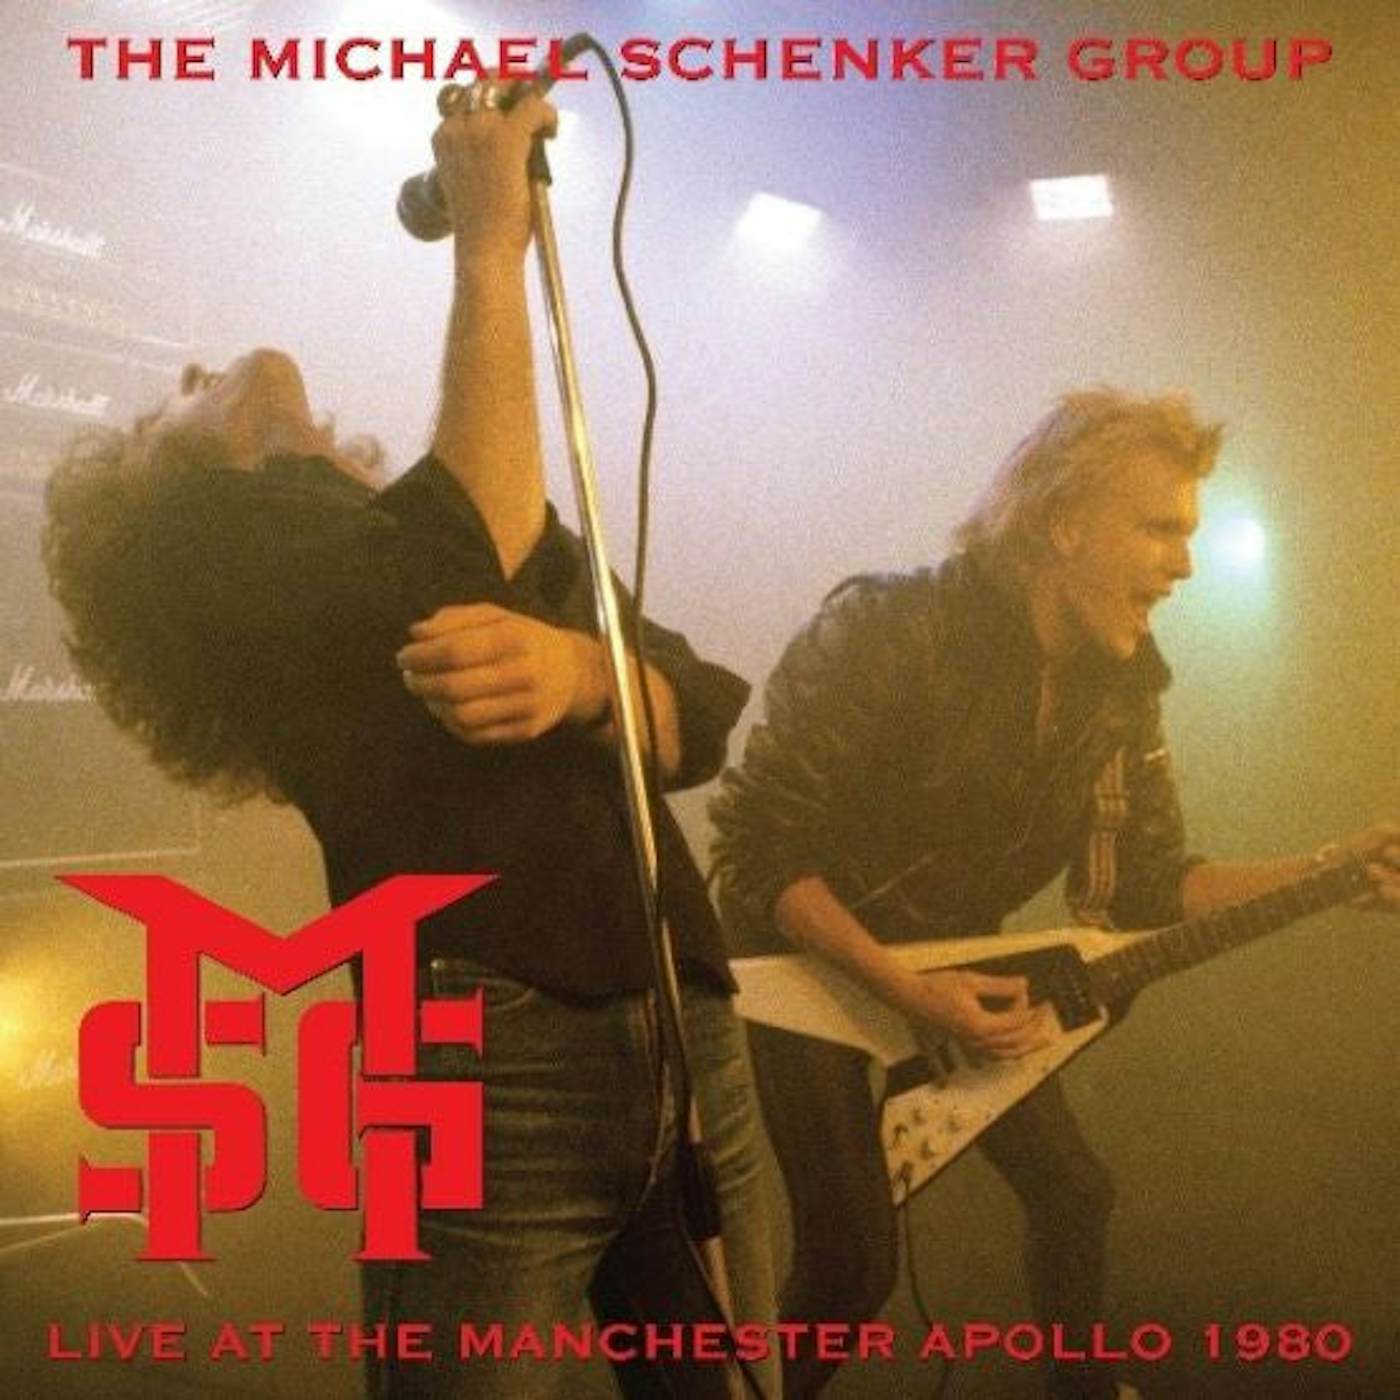 Michael Schenker Group Live At The Manchester Apollo 1980 Vinyl Record